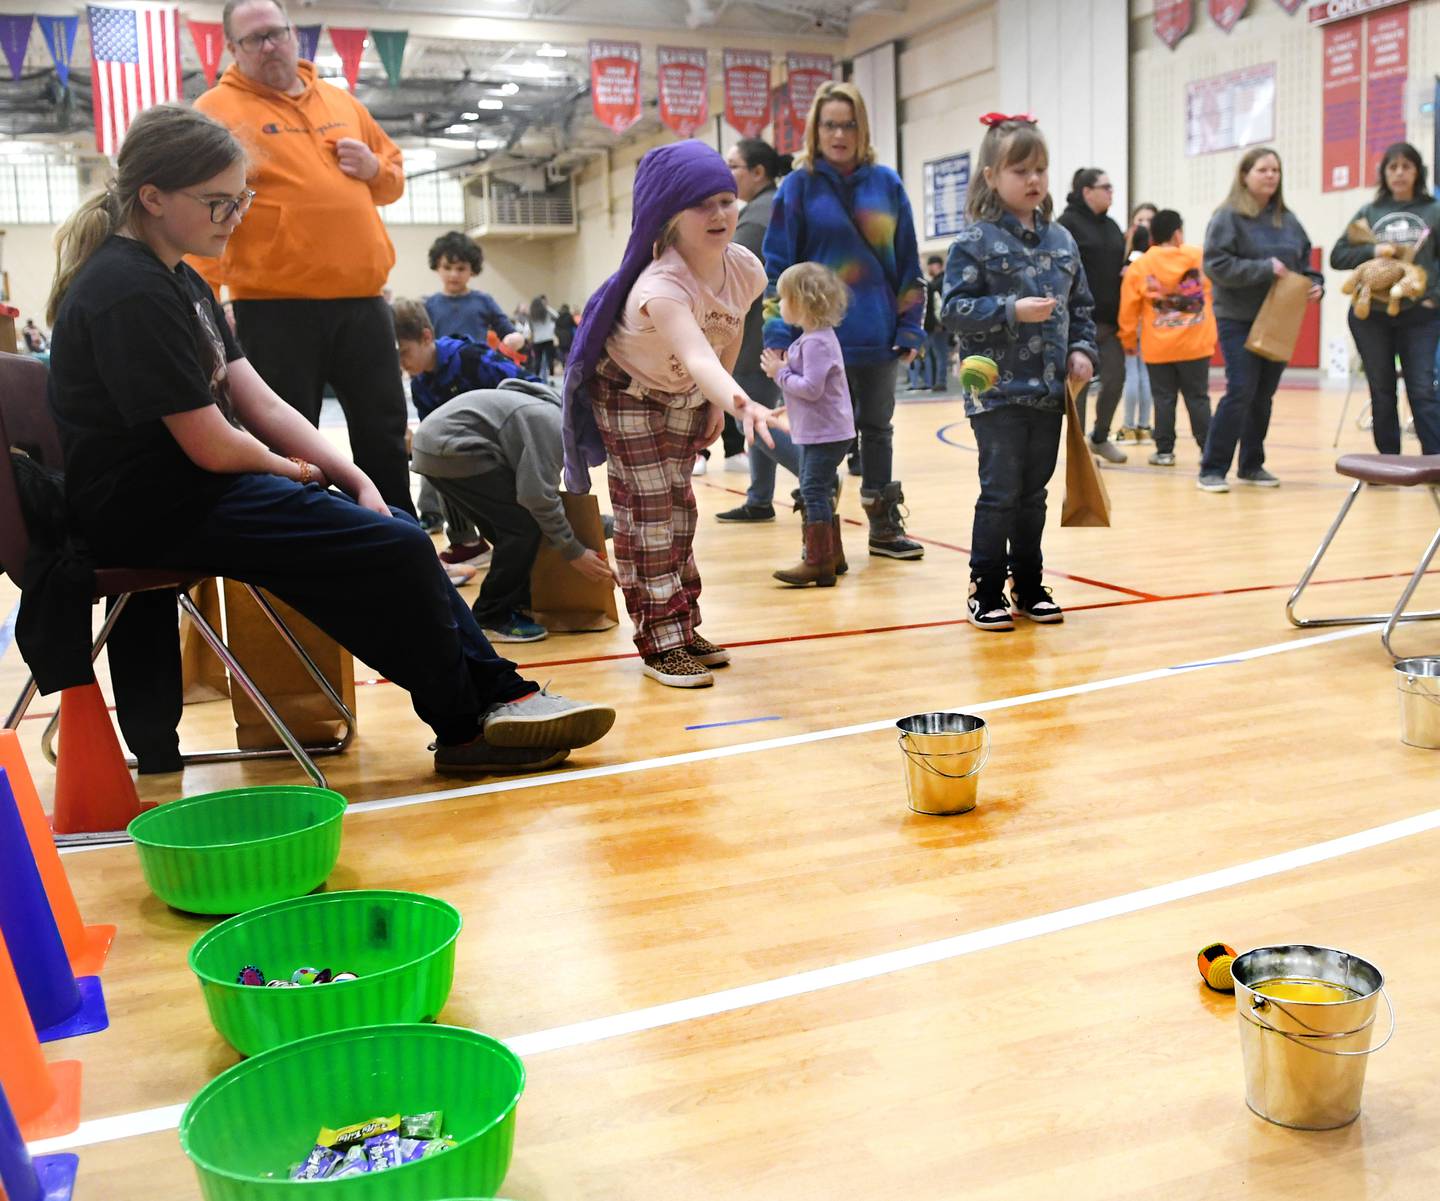 Ulta Zabran, 9, of Byron tosses a ball towards a bucket at the 4-H Penny Carnival on Saturday, March 18. The Leaf River Soaring Eagles 4-H Club offered this game at the fundraising event.